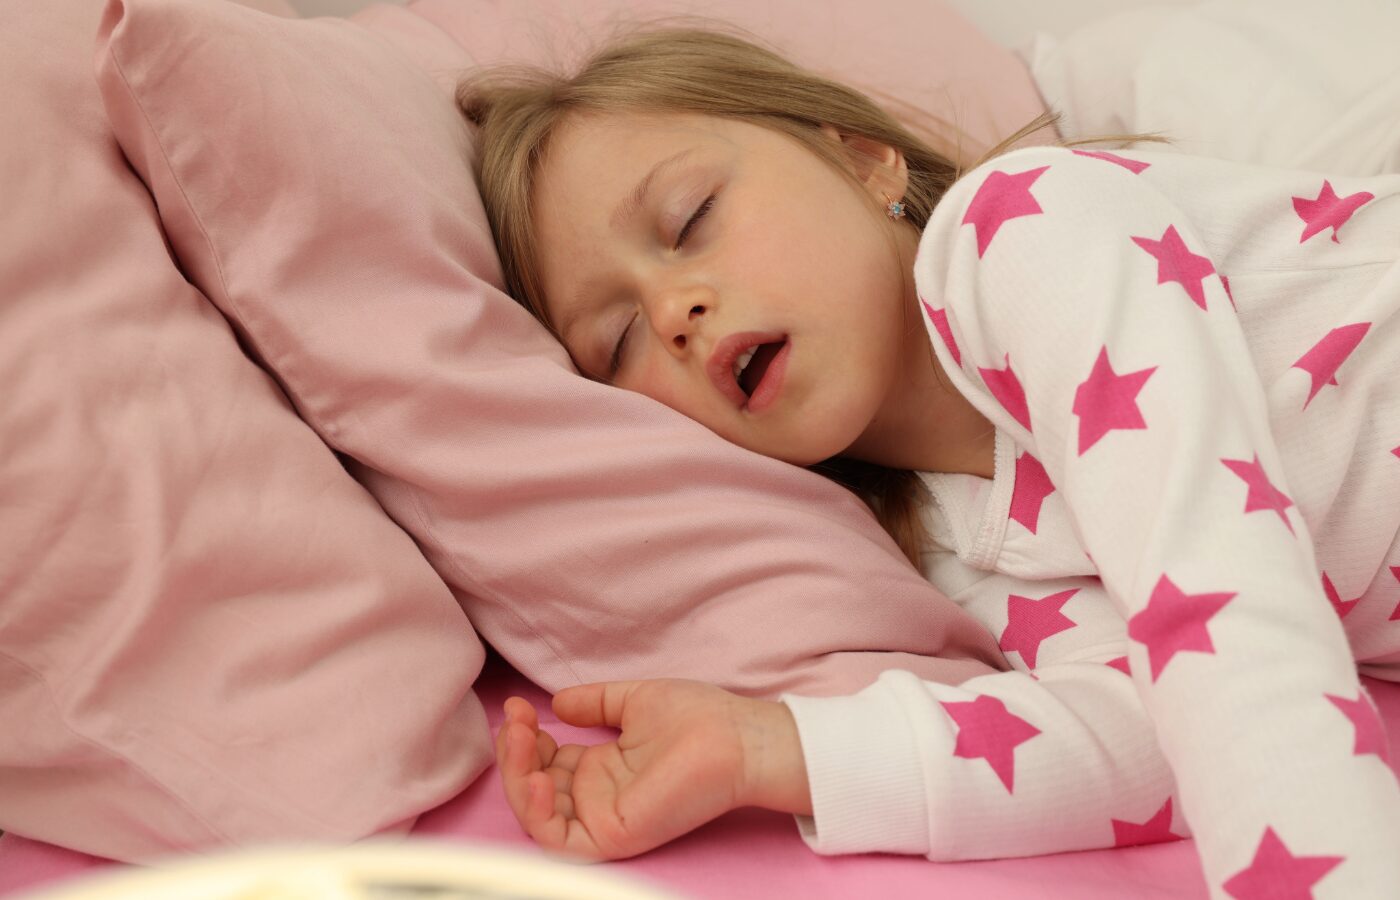 Photo of a young girl in white pjs with pink stars asleep on pink sheets with mouth open